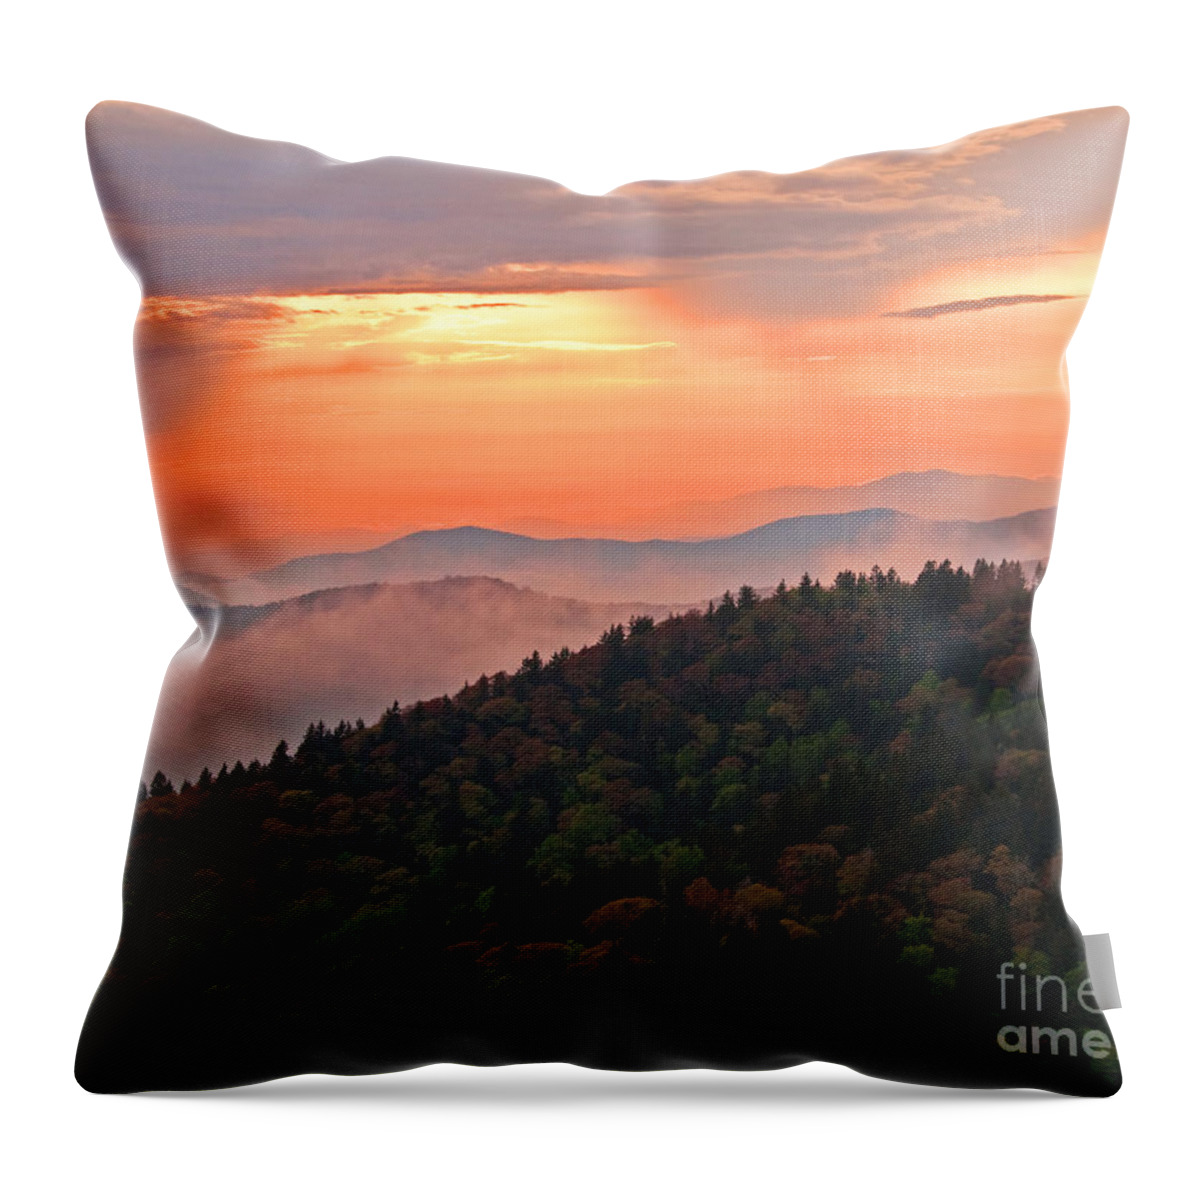  Throw Pillow featuring the photograph Blue Ridge Sunset #1 by Bob and Nancy Kendrick